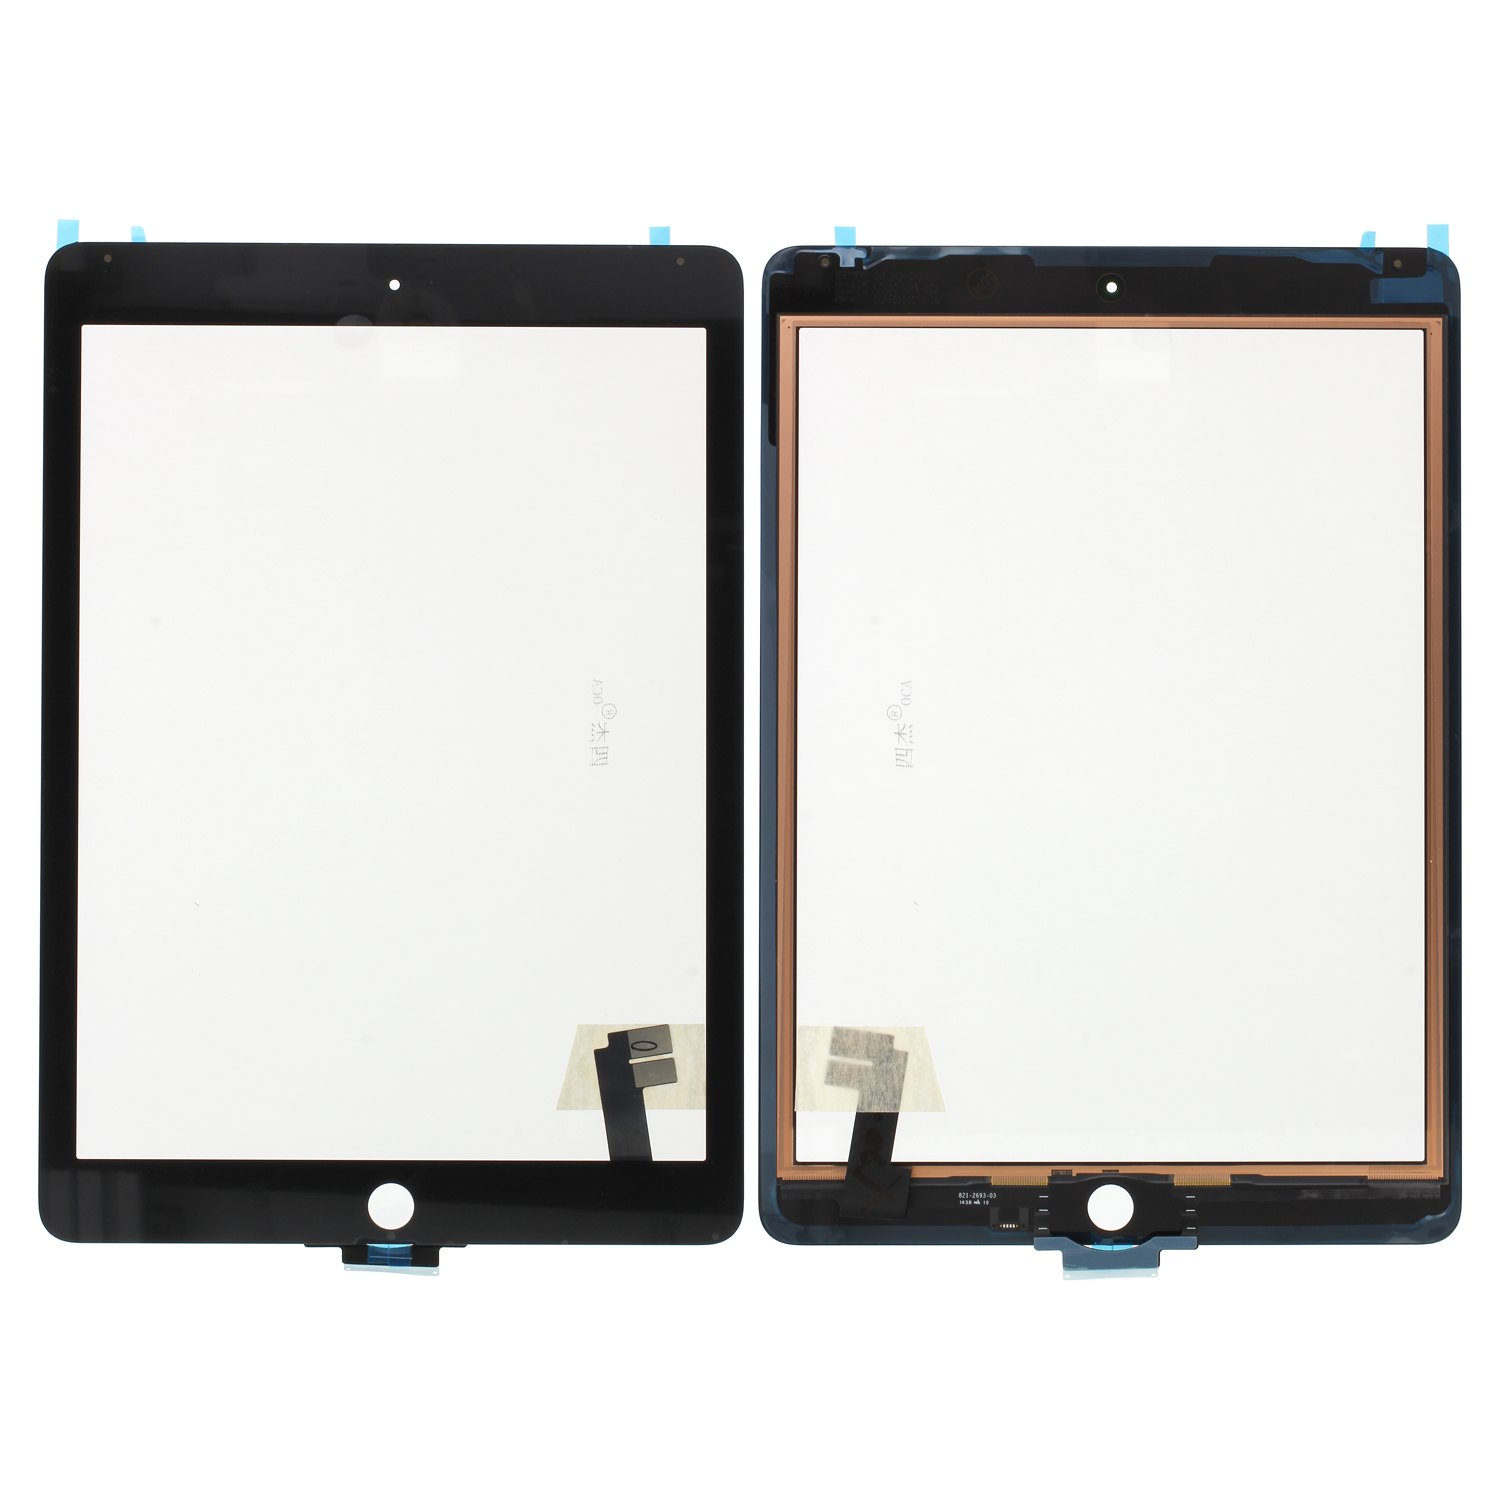 Touch Screen compatible with iPad Air 2 9.7" (2014) Black (A1566 ,A1567 )